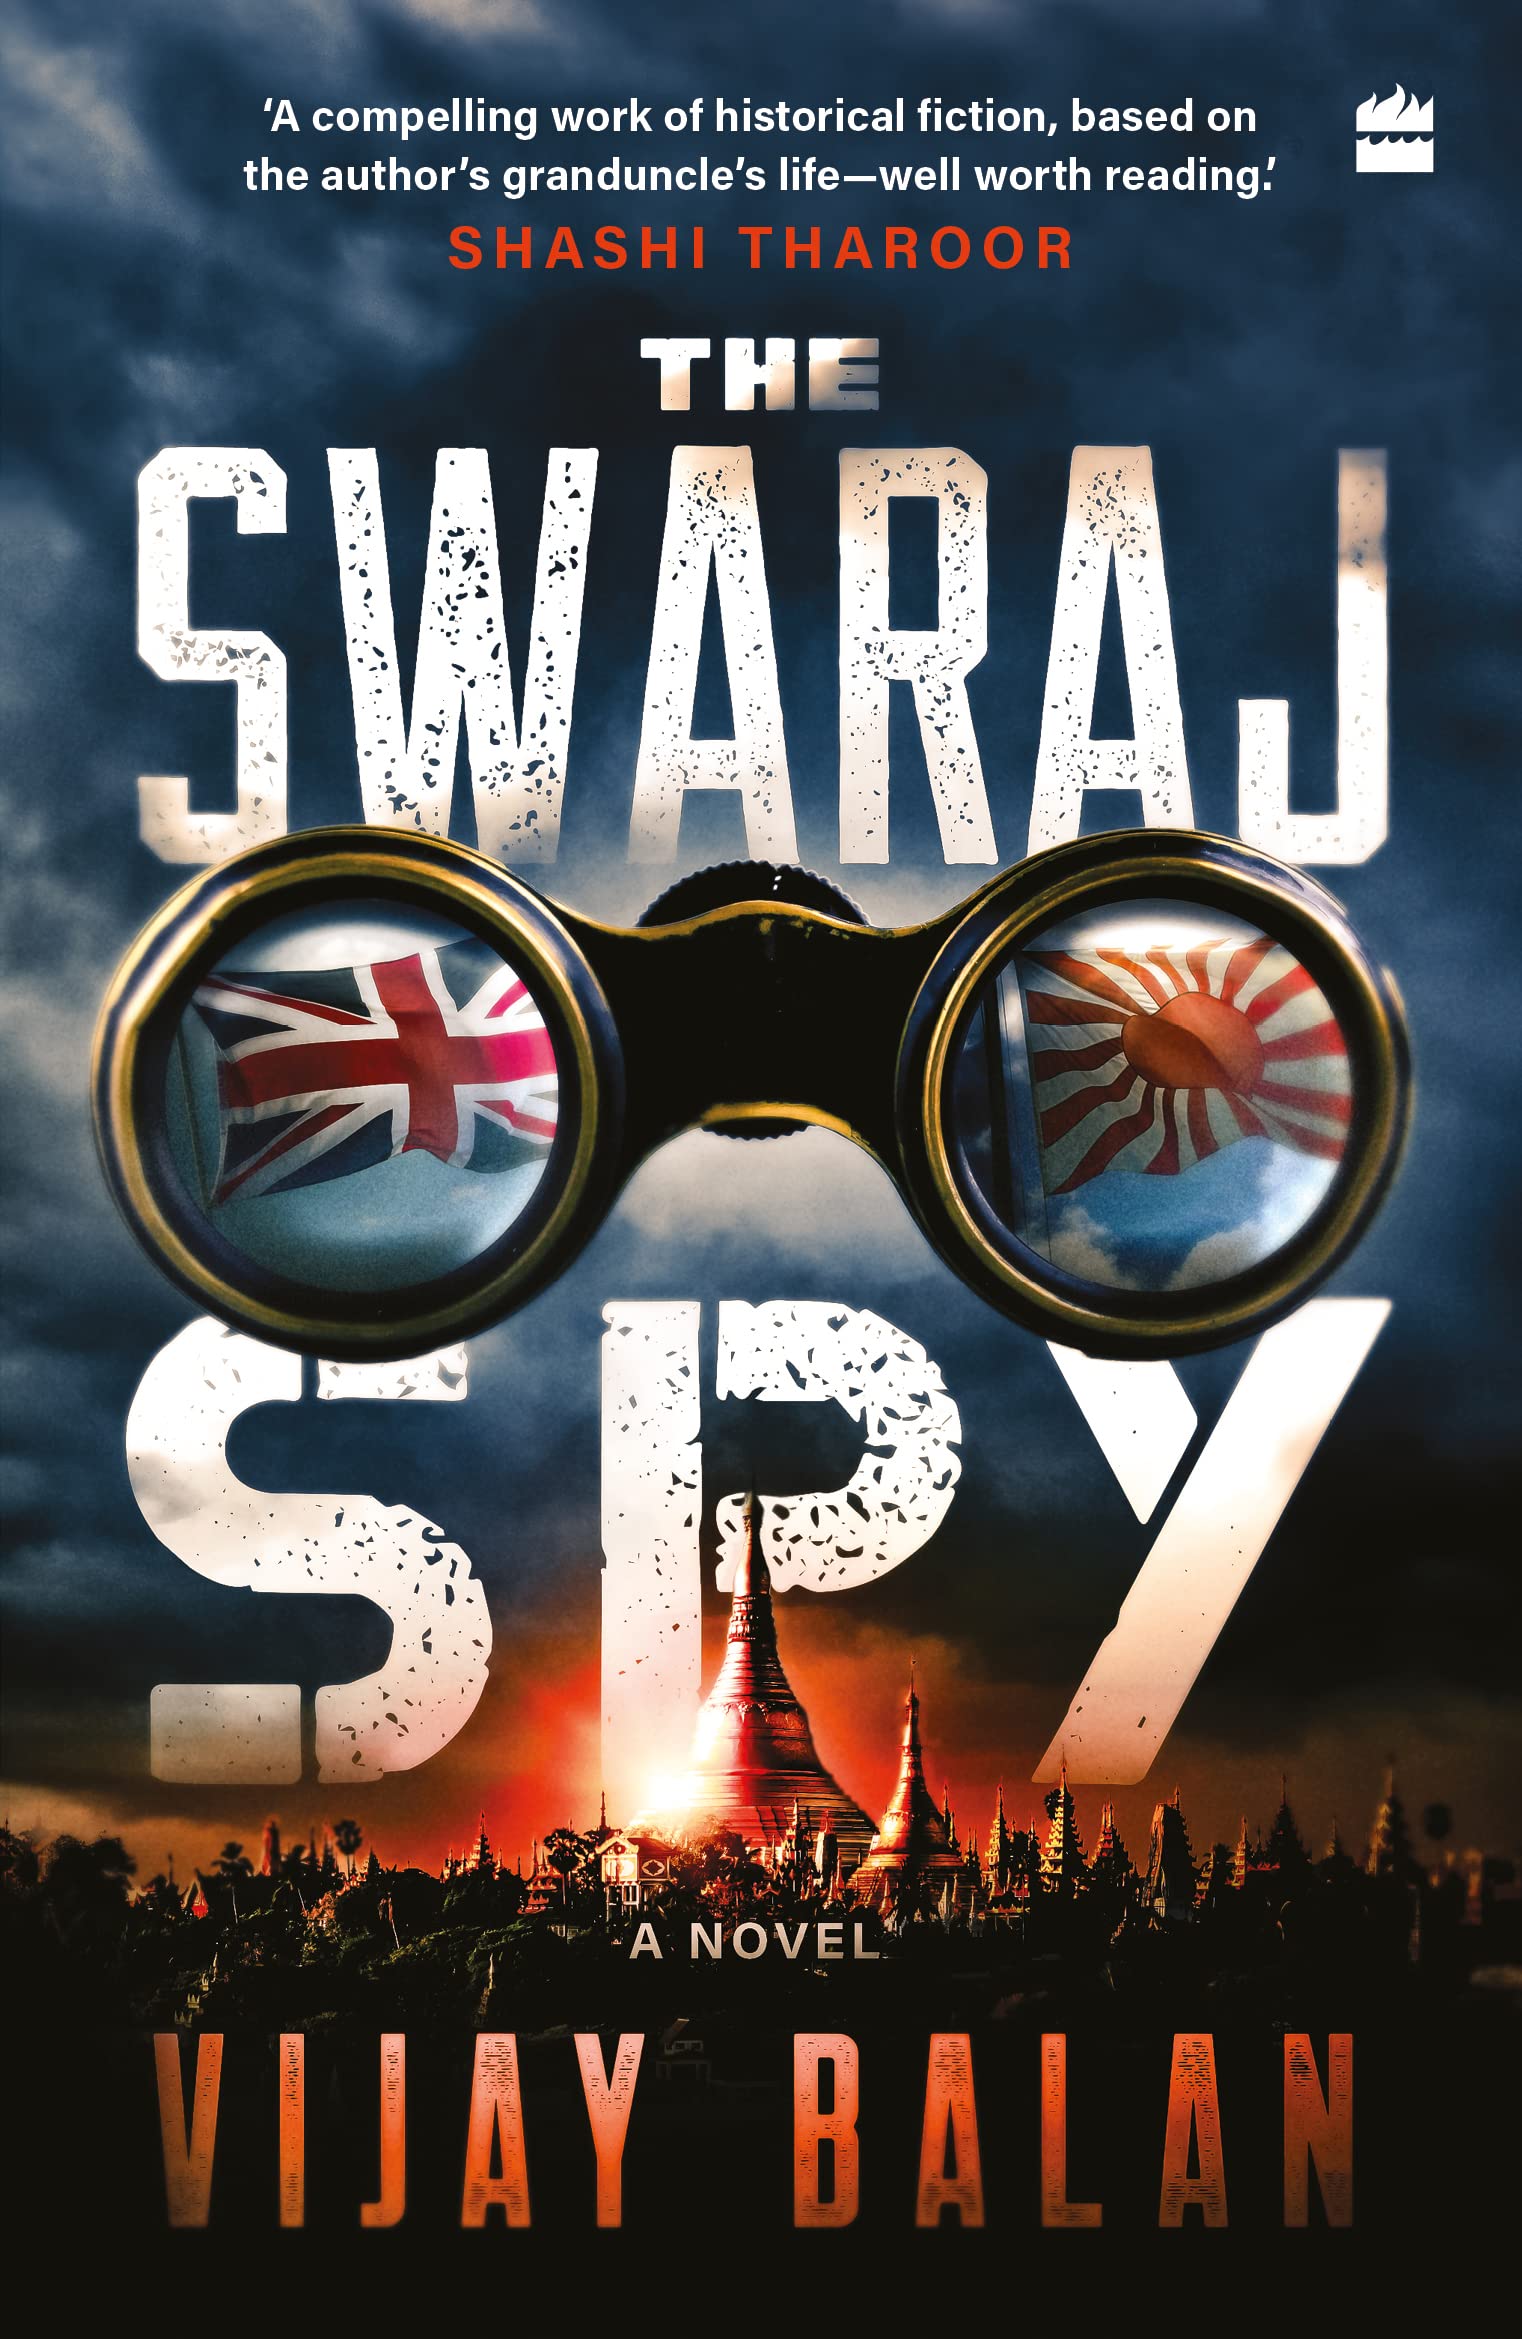 "The Swaraj Spy": This novel depicts a brave Indian man’s experience with espionage and wartime strategy during the second world war